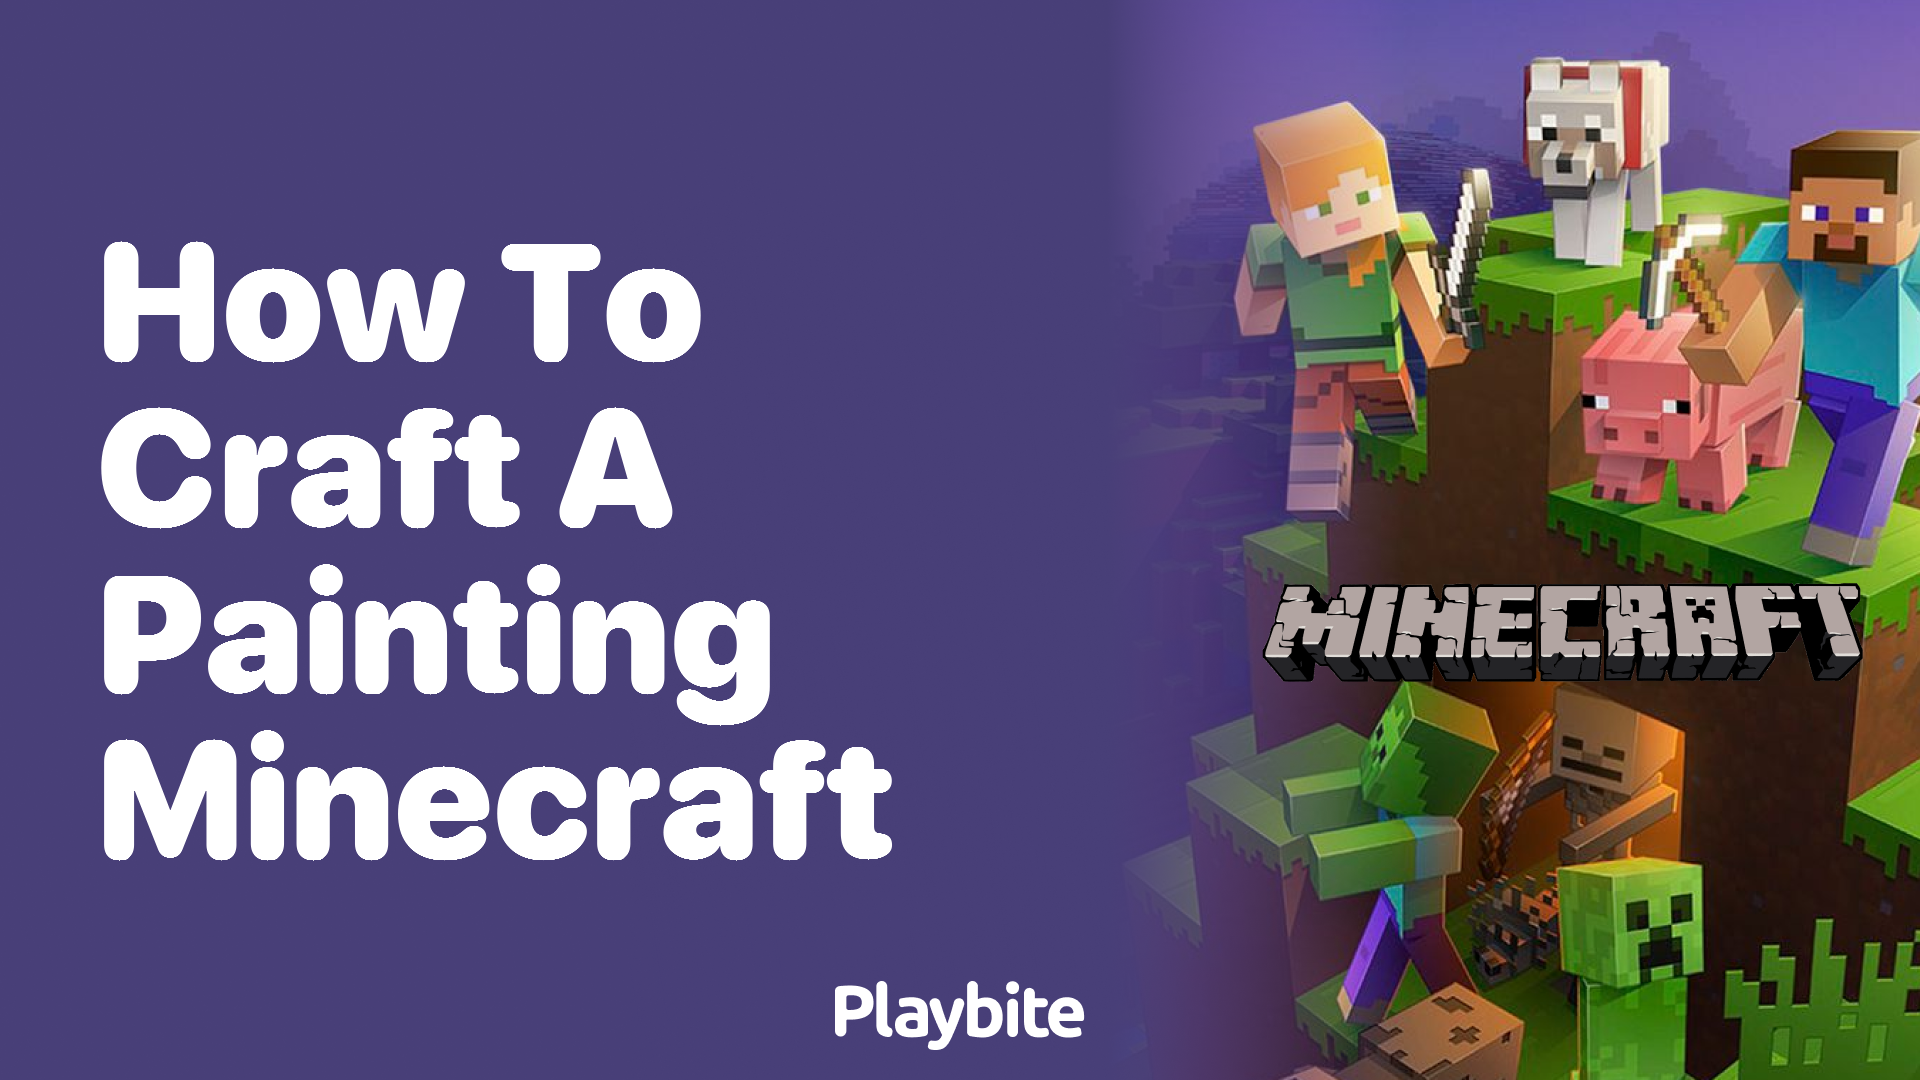 How to Turn Off the Minecraft Tutorial: A Quick Guide - Playbite